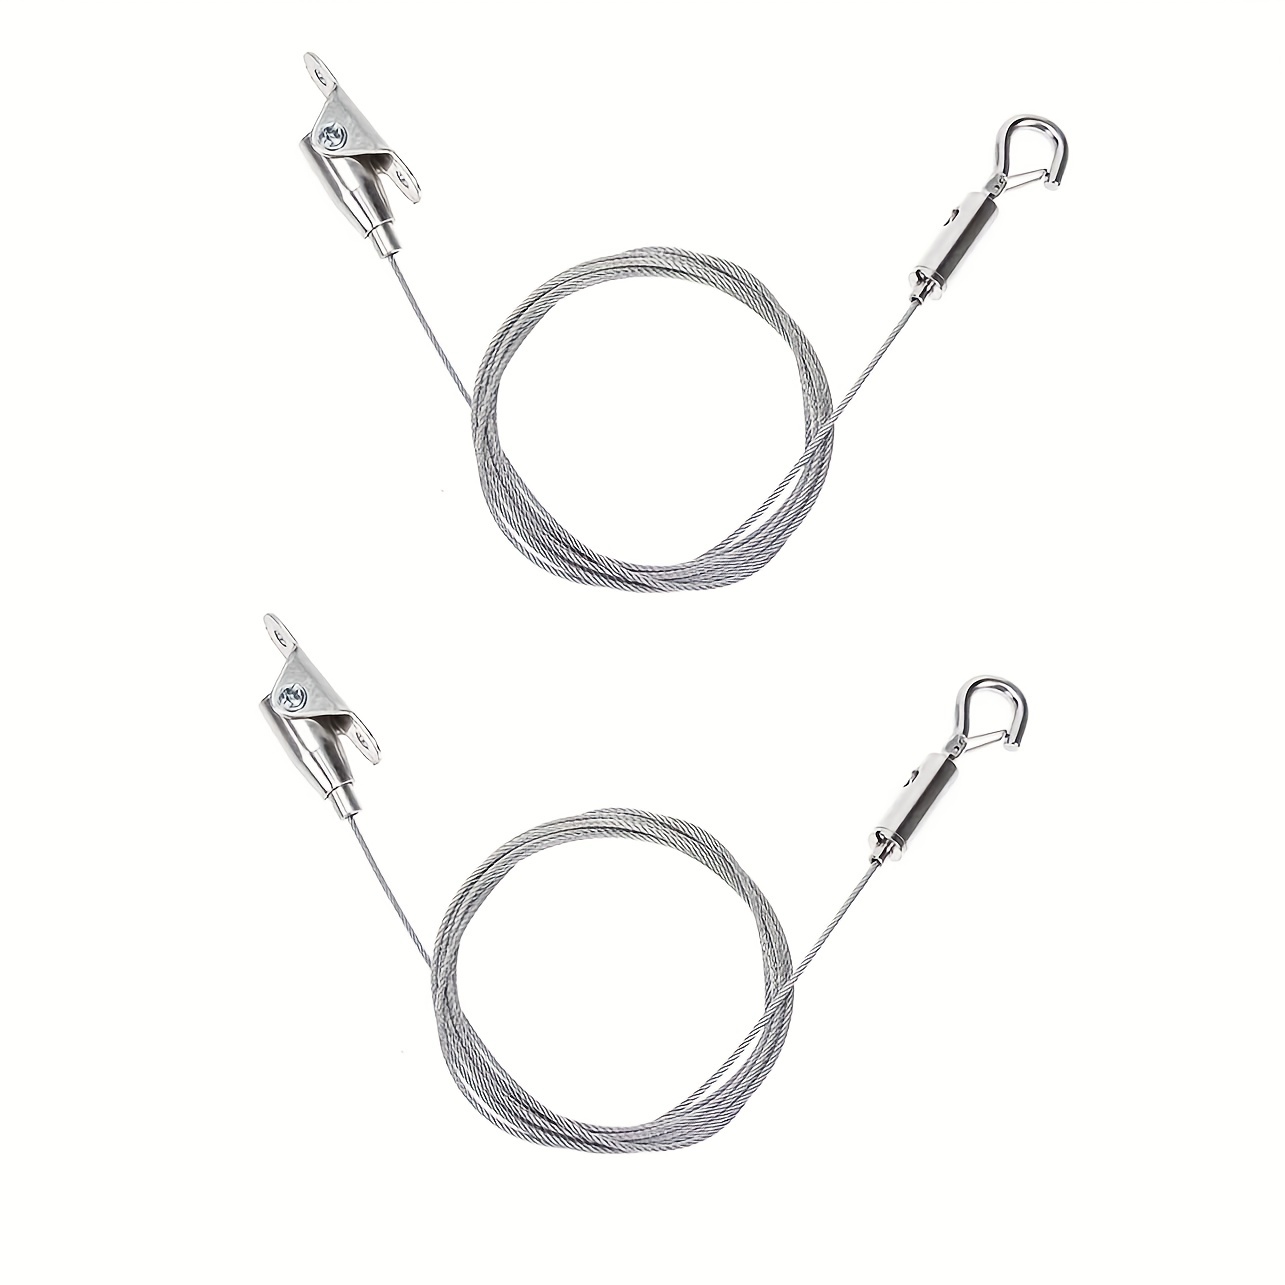 2PCS Adjustable Picture Hanging Wire Kit - Heavy Duty Hardware , 1M X1.5Mm  Stainless Steel Cables Hanging Rope